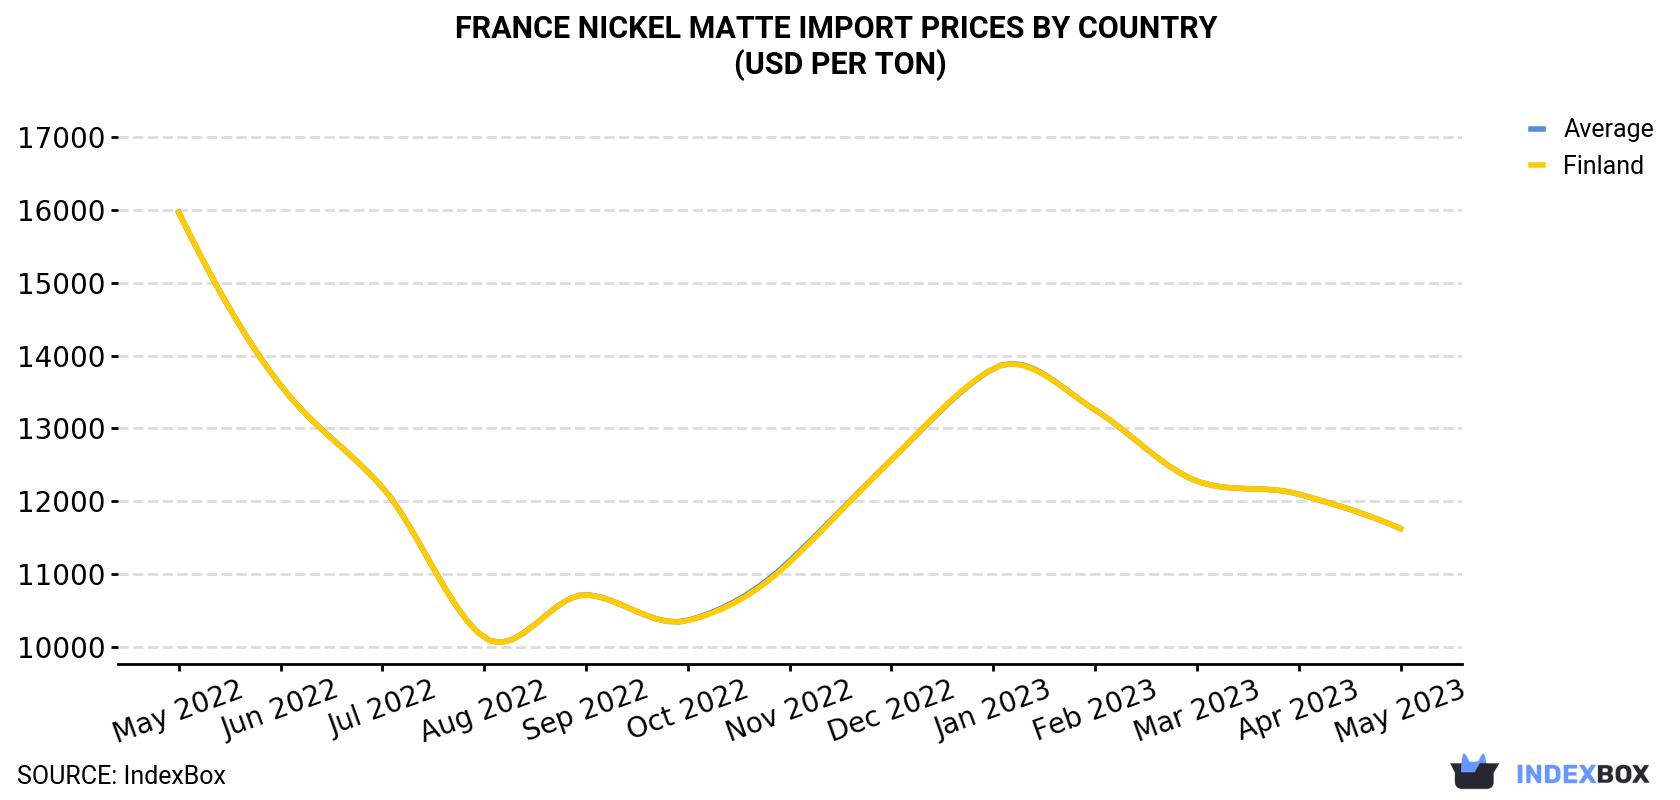 France Nickel Matte Import Prices By Country (USD Per Ton)